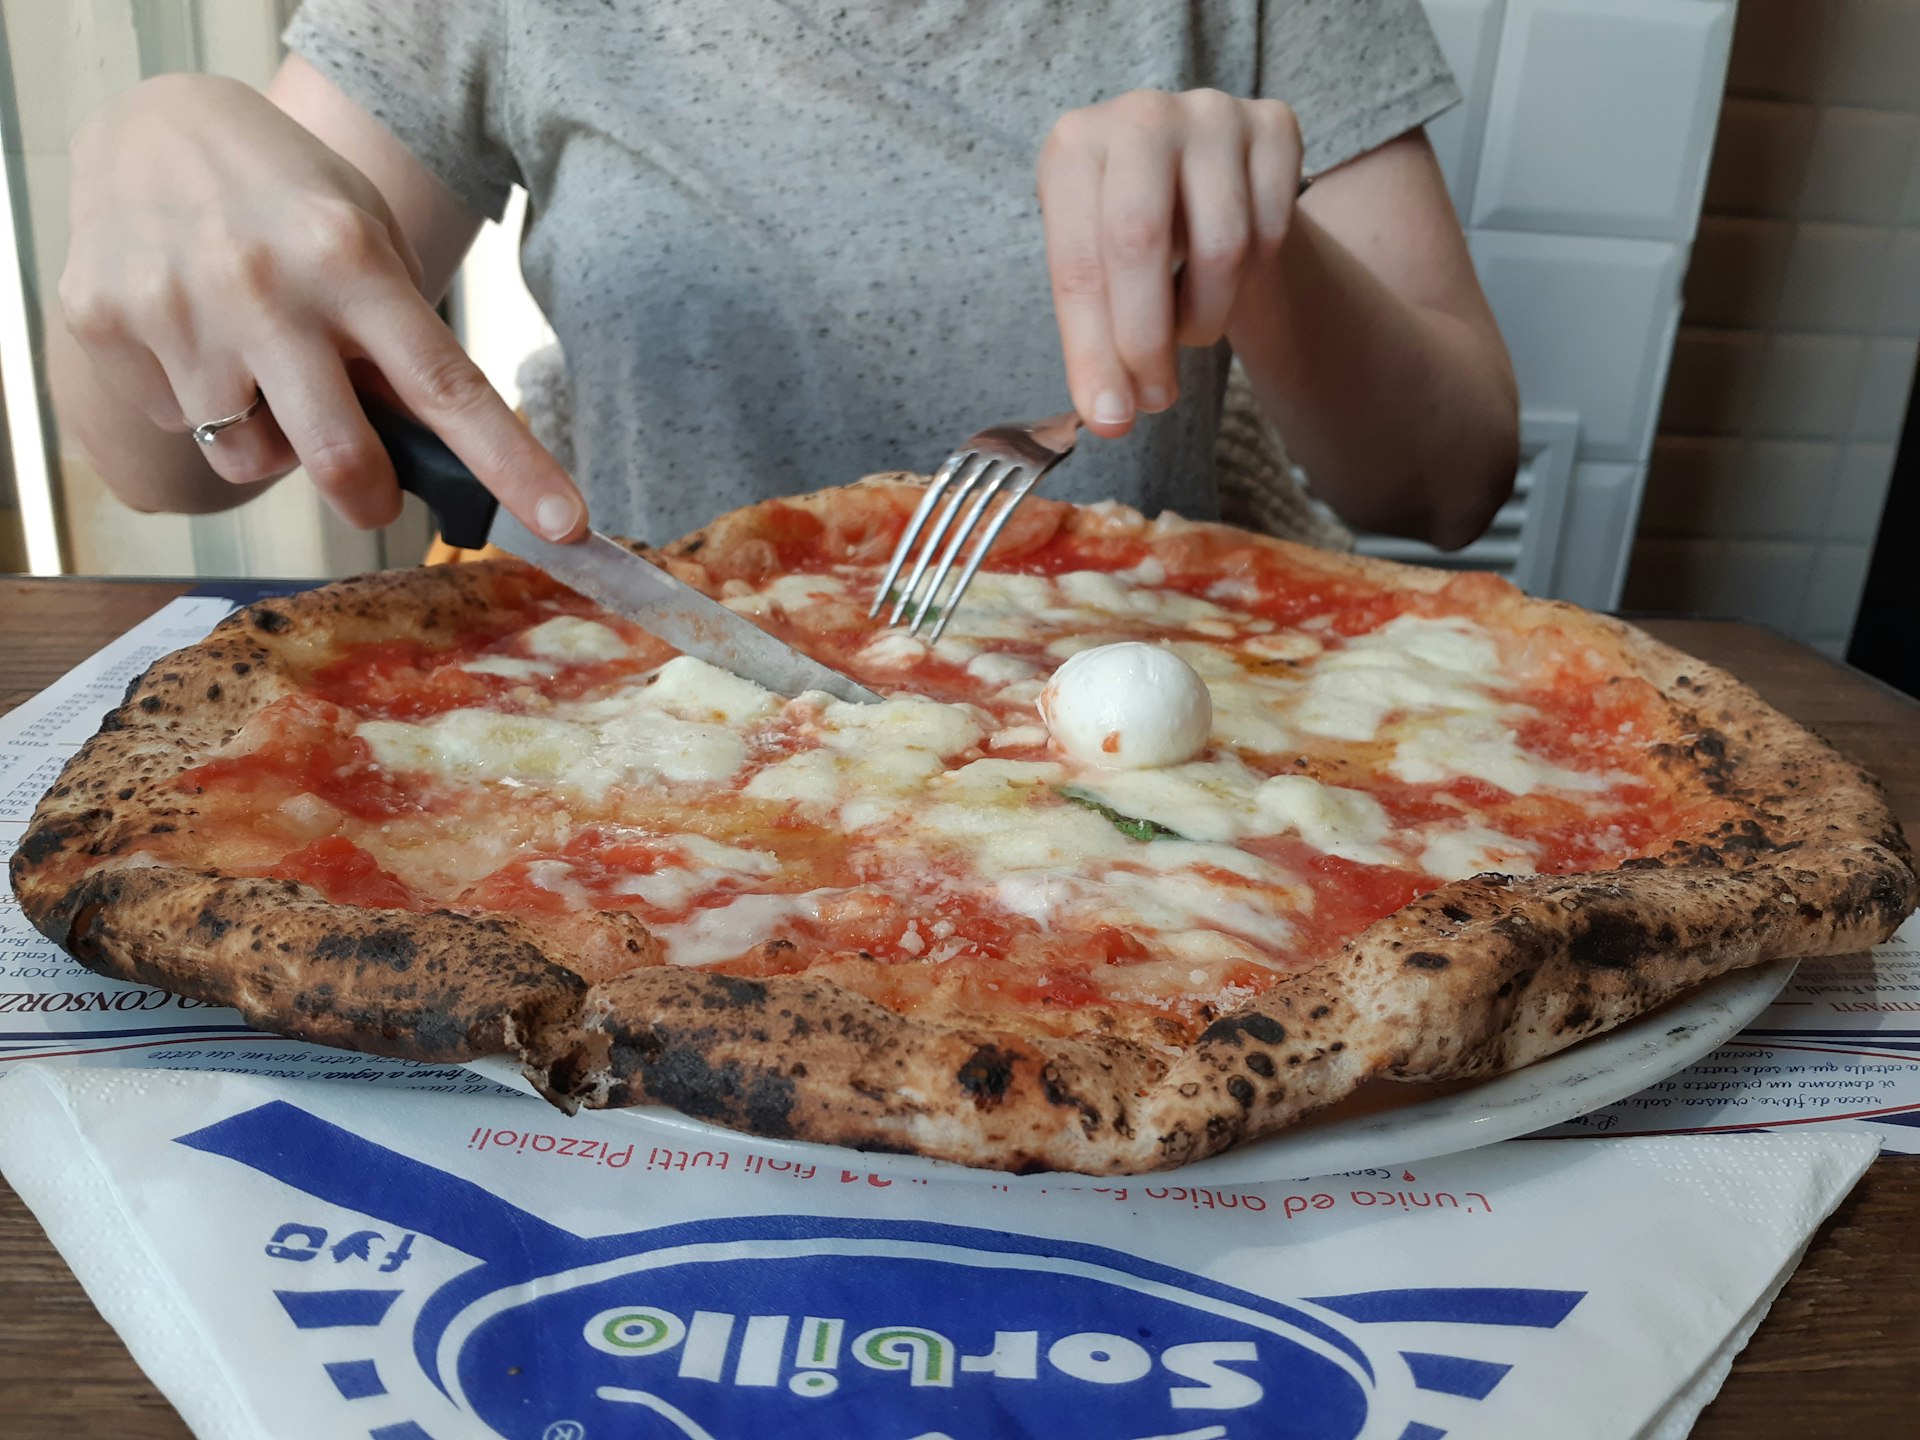 A person sits at a table with a large pizza on it in a blue-and-white box